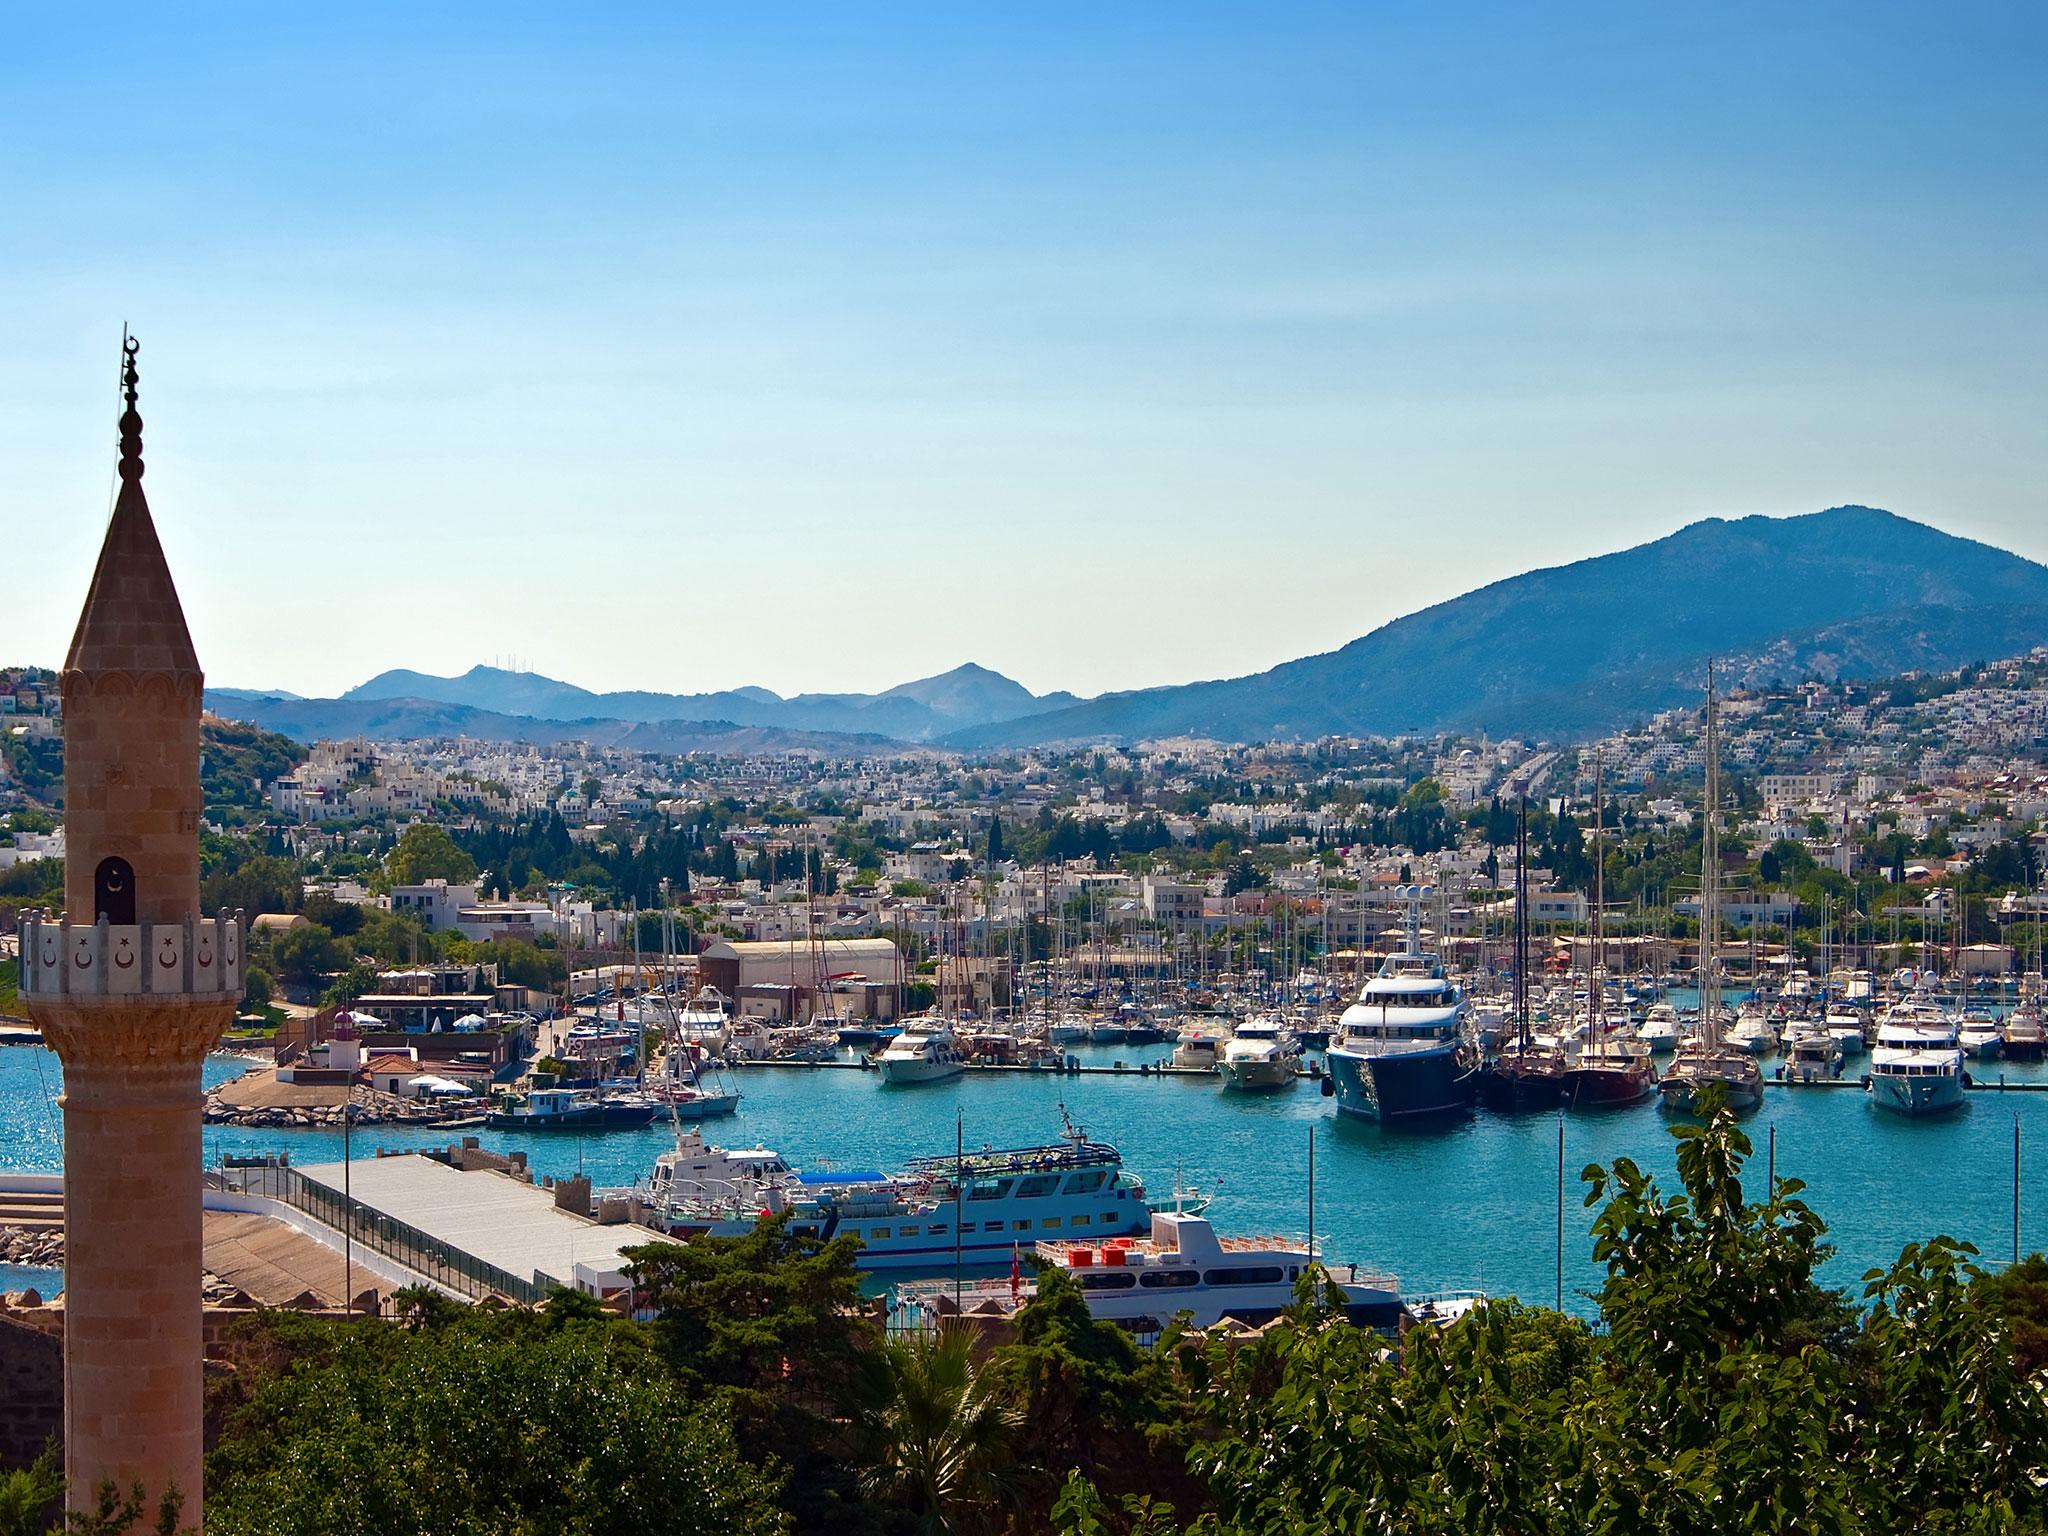 The port city of Bodrum is located on Turkey's eastern coast